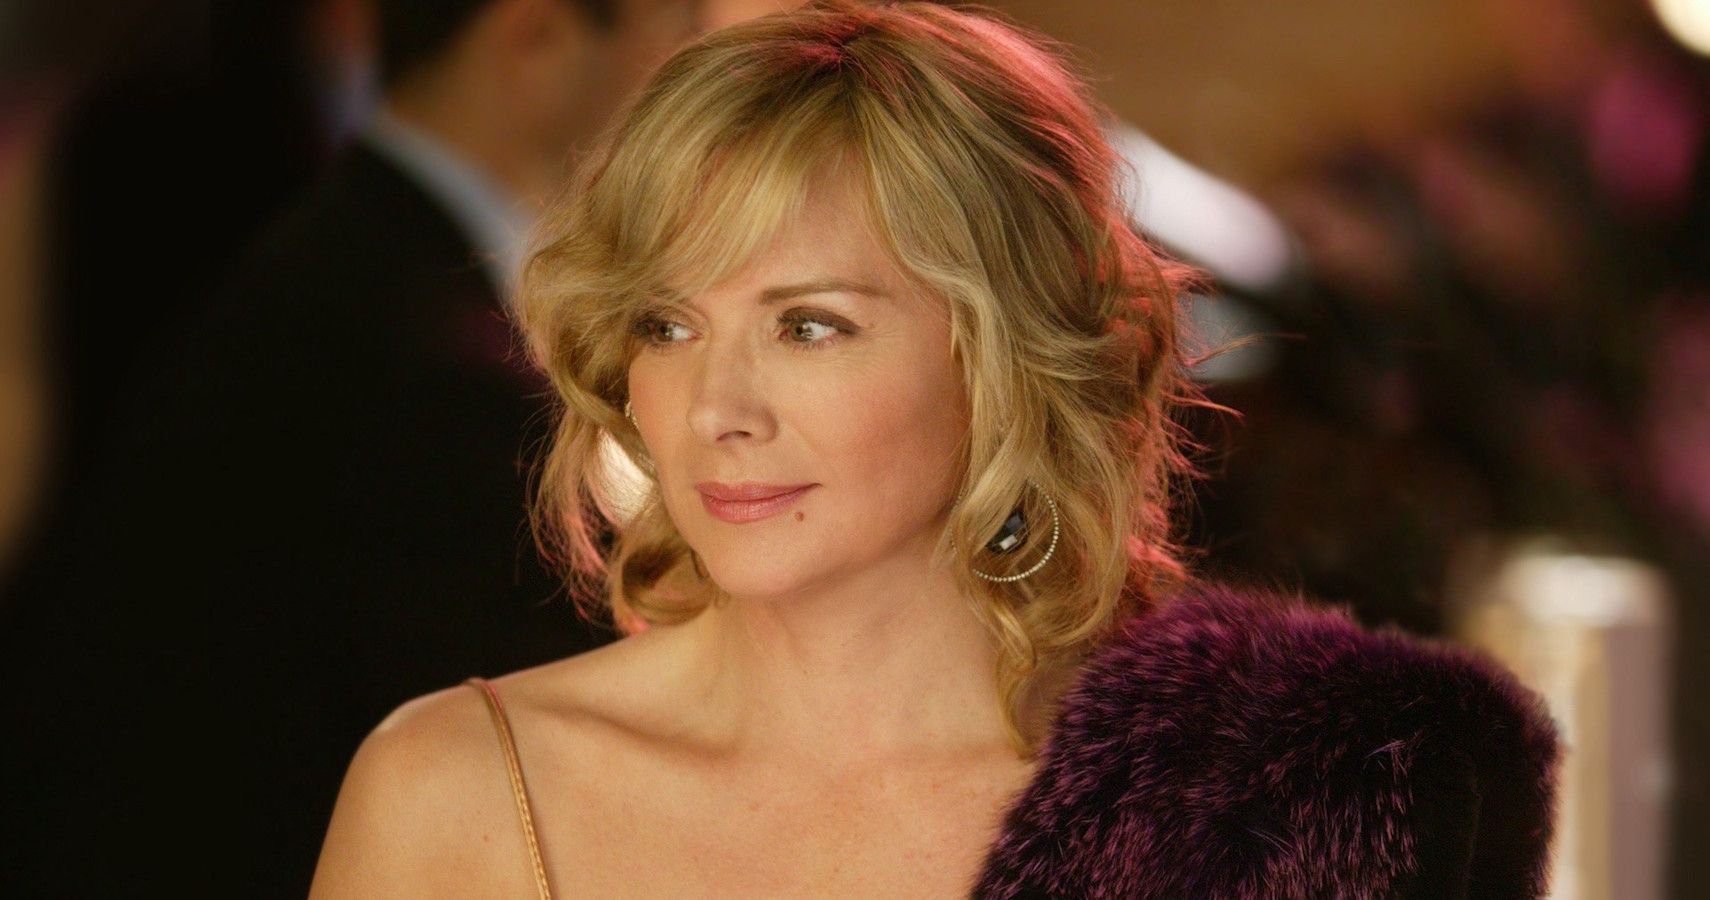 samantha jones in sex and the city